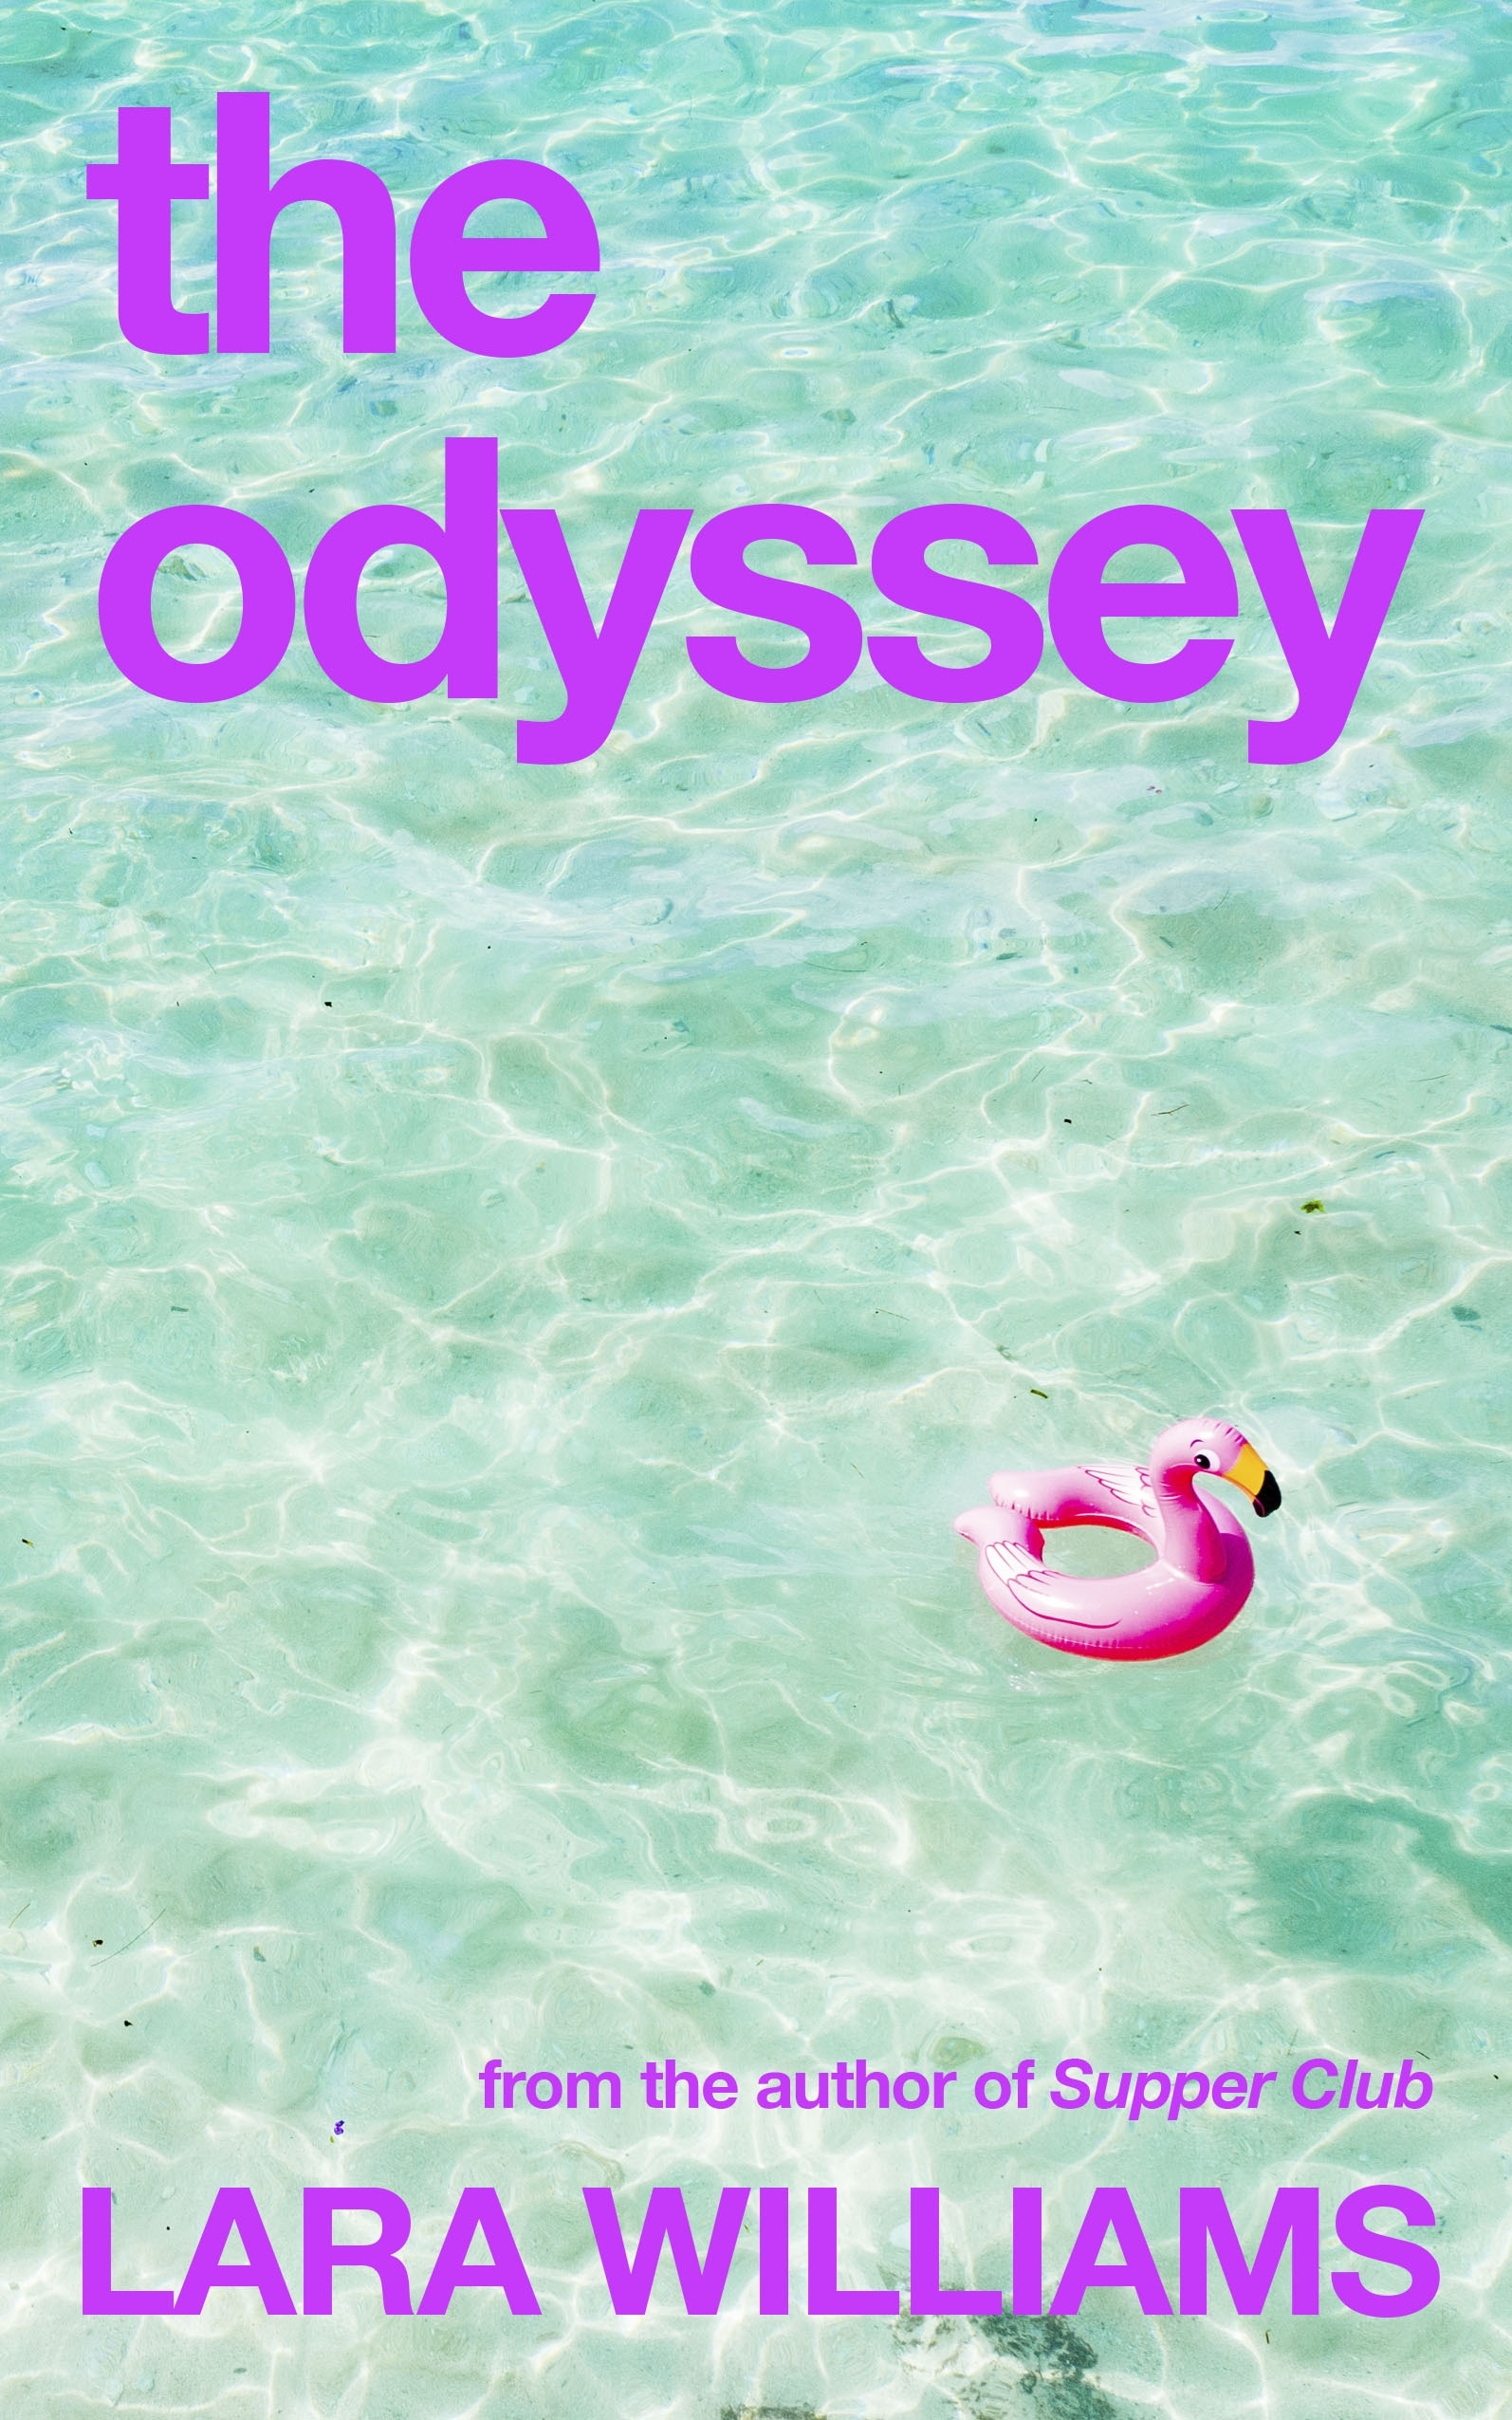 Book “The Odyssey” by Lara Williams — April 21, 2022